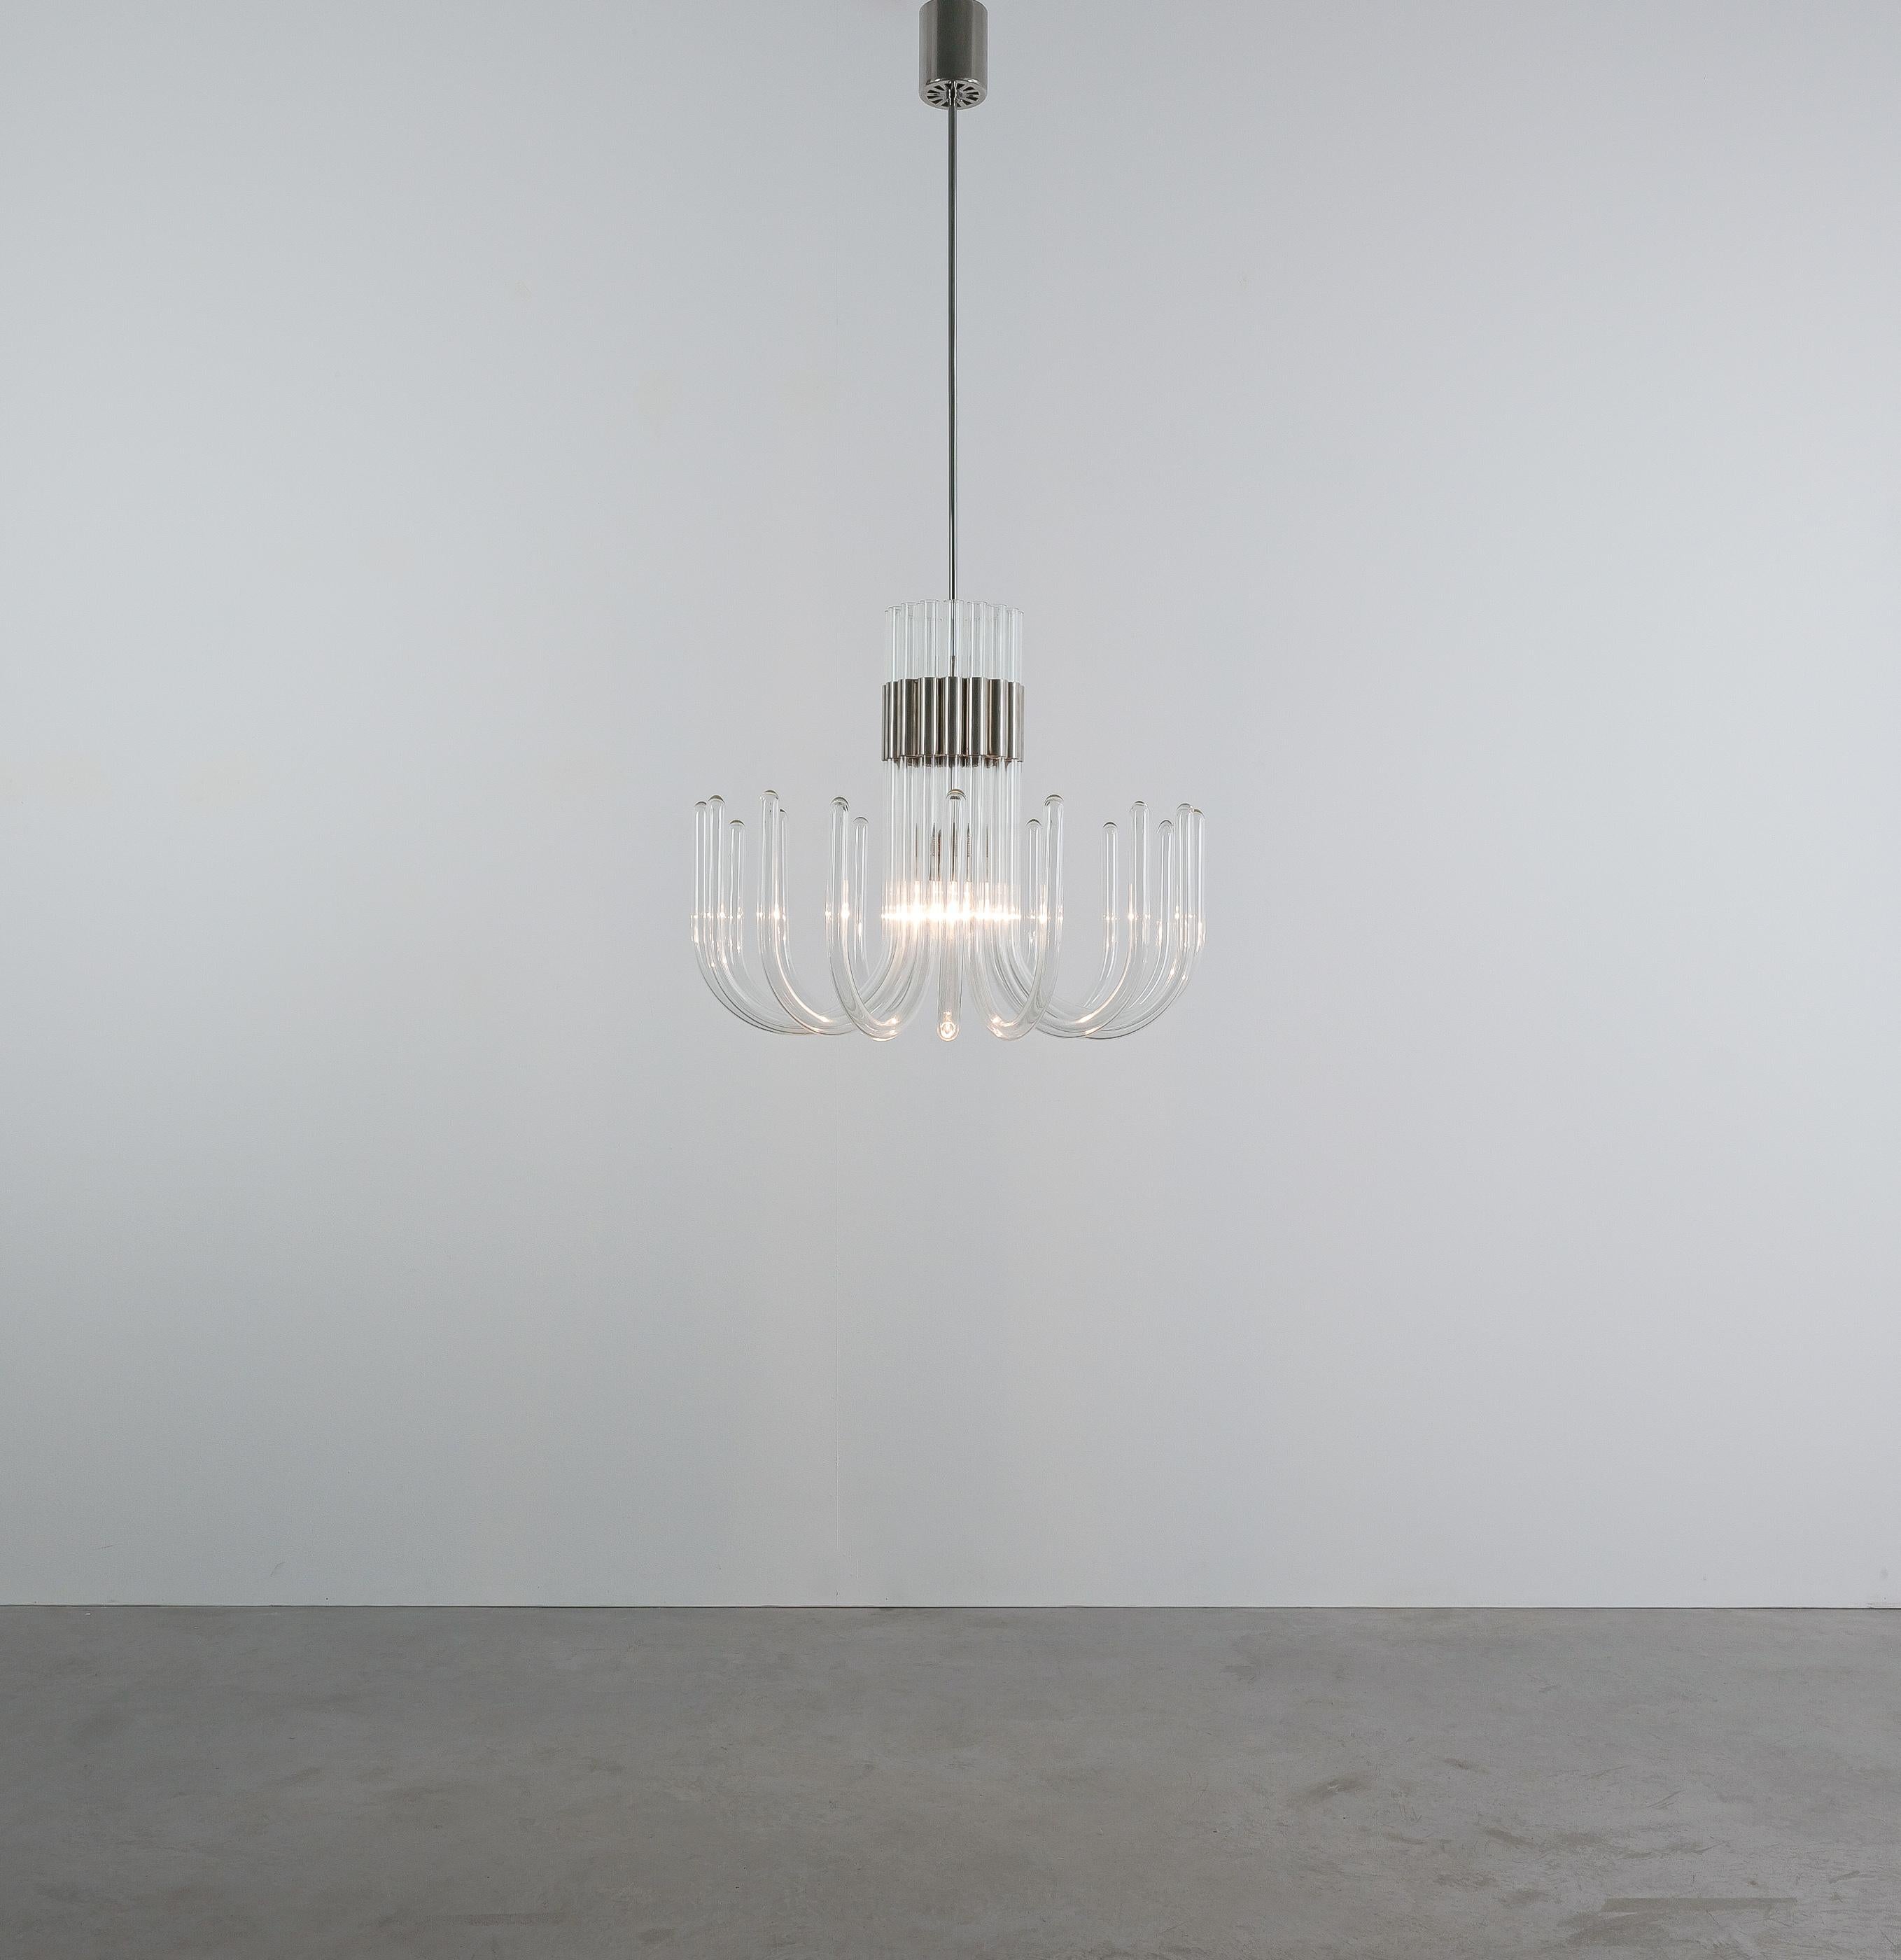 Bespoke glass tube 1970s chandelier, Italy, midcentury

Dimensions are 21.65